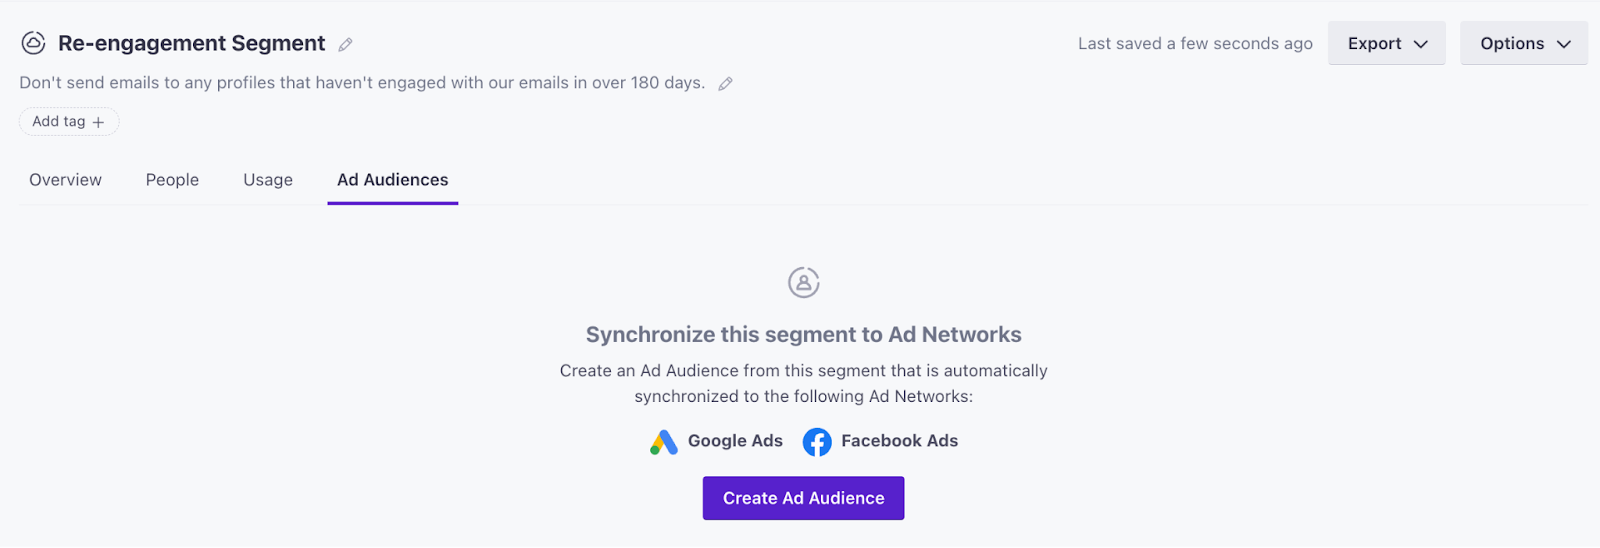 Re-engagement emails: Ad audience sync with Customer.io